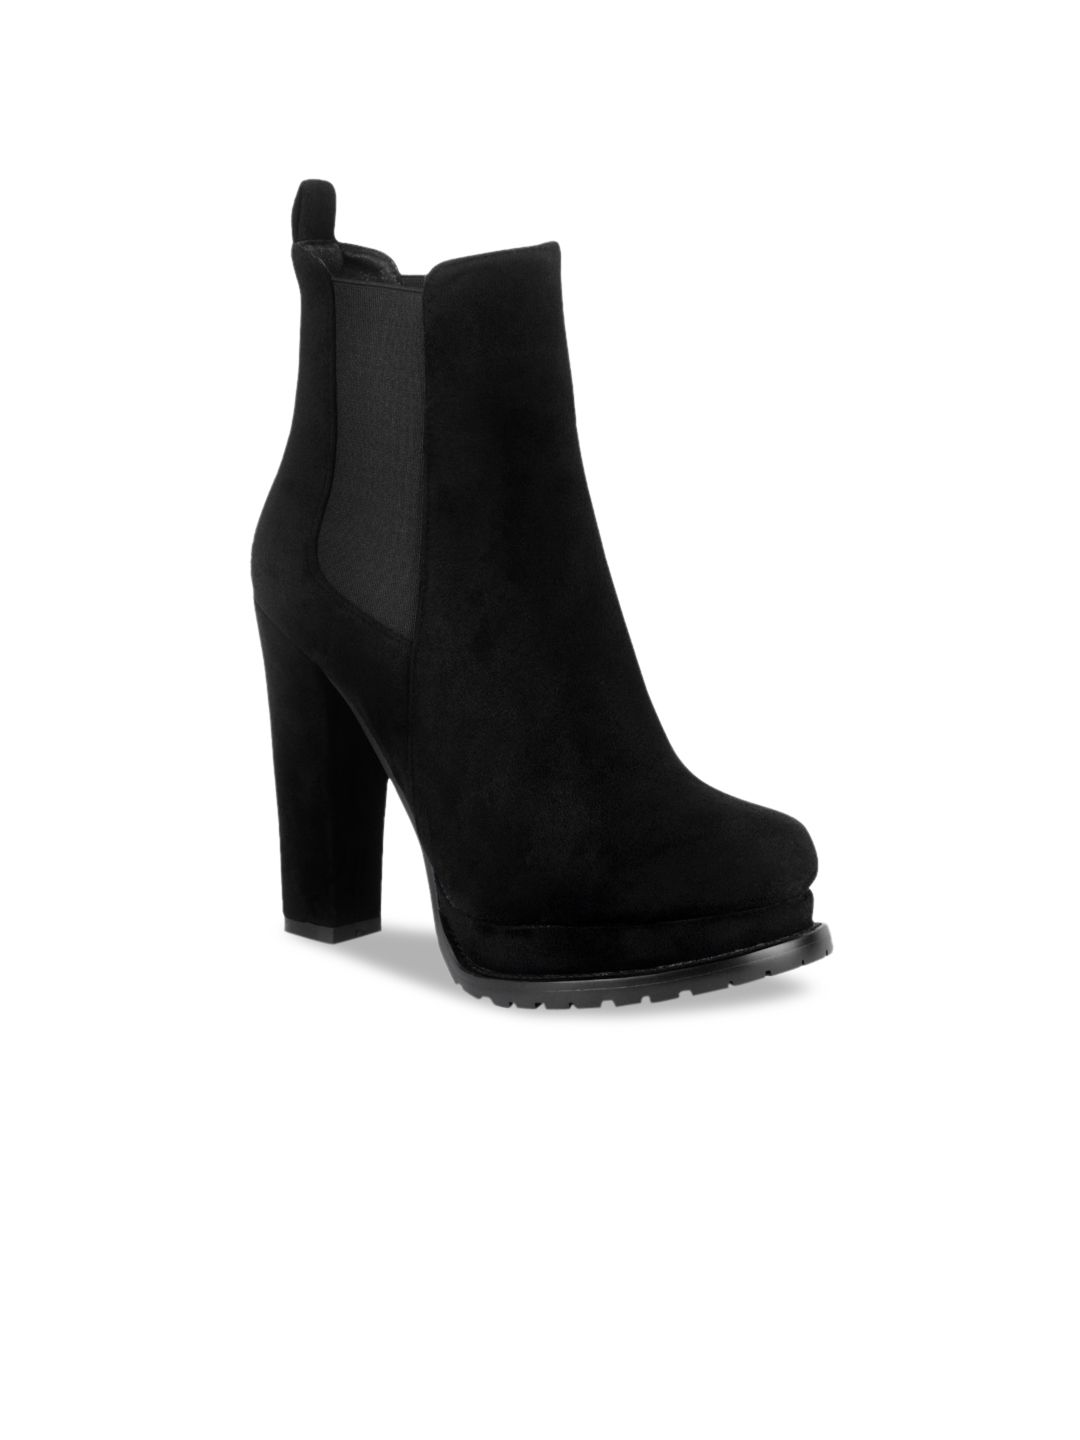 London Rag Black Suede Block Heeled Boots Price in India